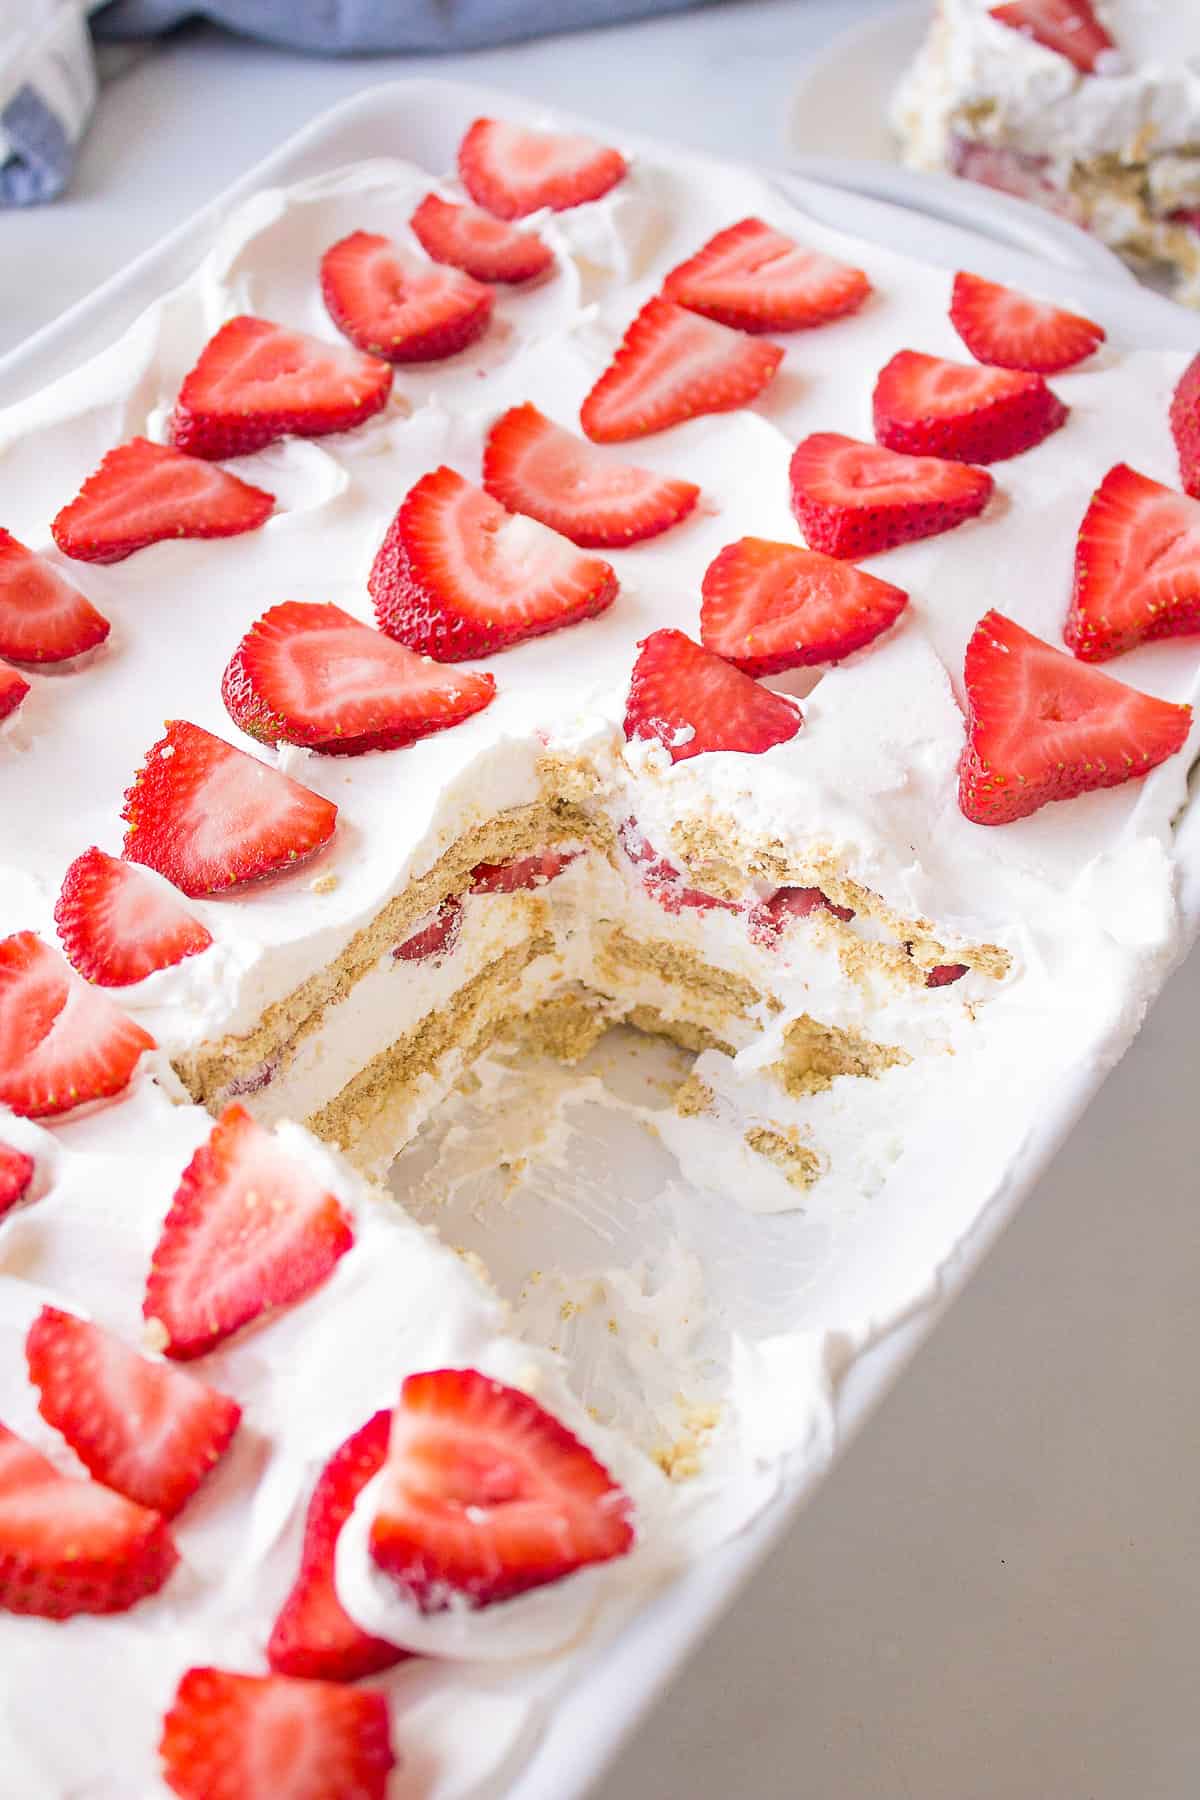 close up image of strawberry icebox cake served in a casserole dish showing the cross section